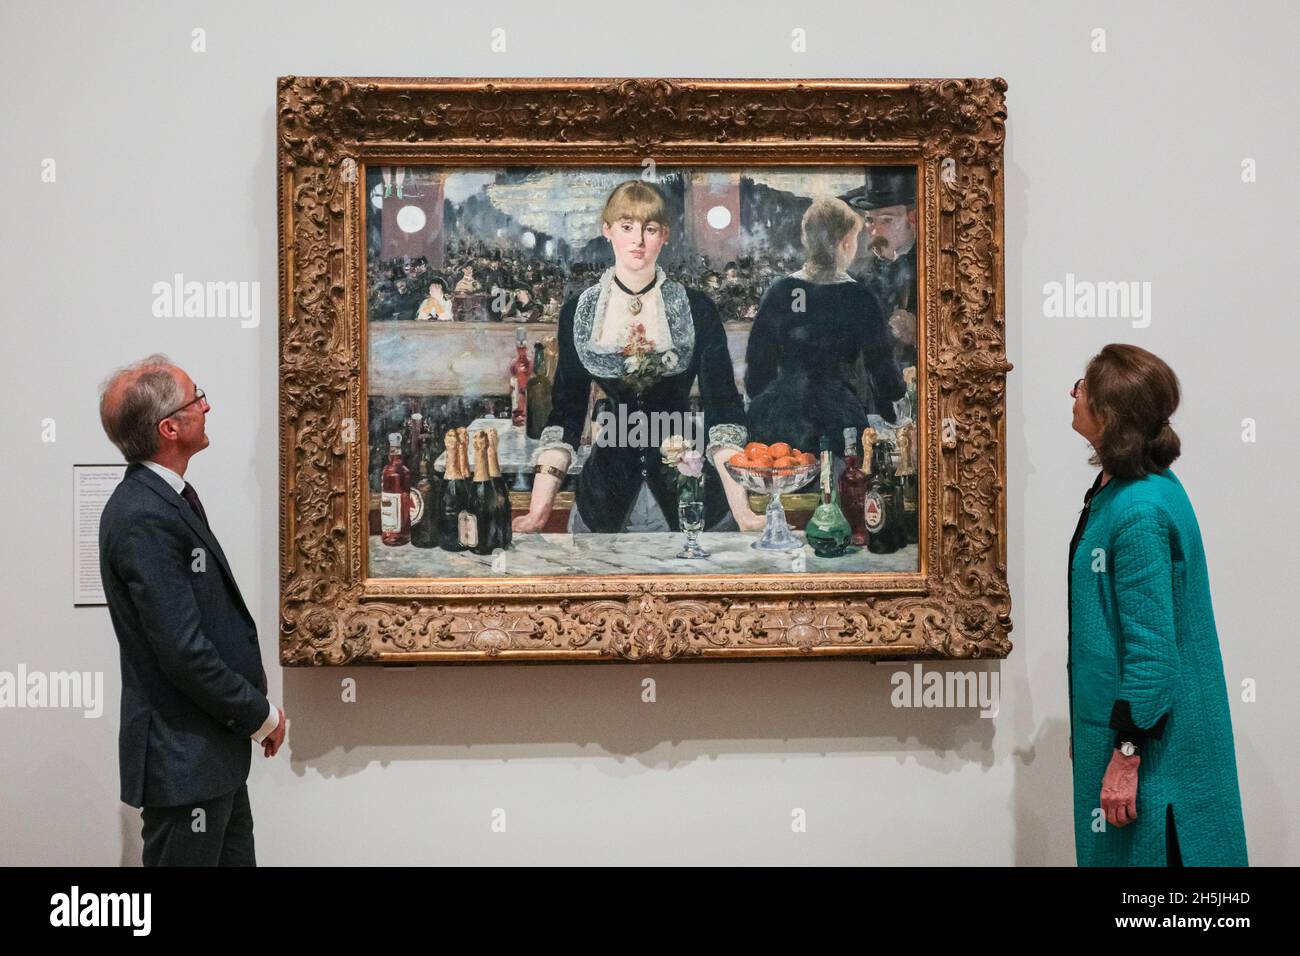 London, UK. 10th Nov, 2021. Courtauld Directors, Dr. Ernst Vegelin van Claerbergen, and Professor Deborah Swallow, with Edouard Manet's 'A Bar at the Folies-Bergere', (1882). The Courtauld Gallery at Somerset House in London will re-open to the public on Friday 19 November following the most significant modernisation project in its history, providing a transformed home for one of the UK's greatest art collections. Credit: Imageplotter/Alamy Live News Stock Photo